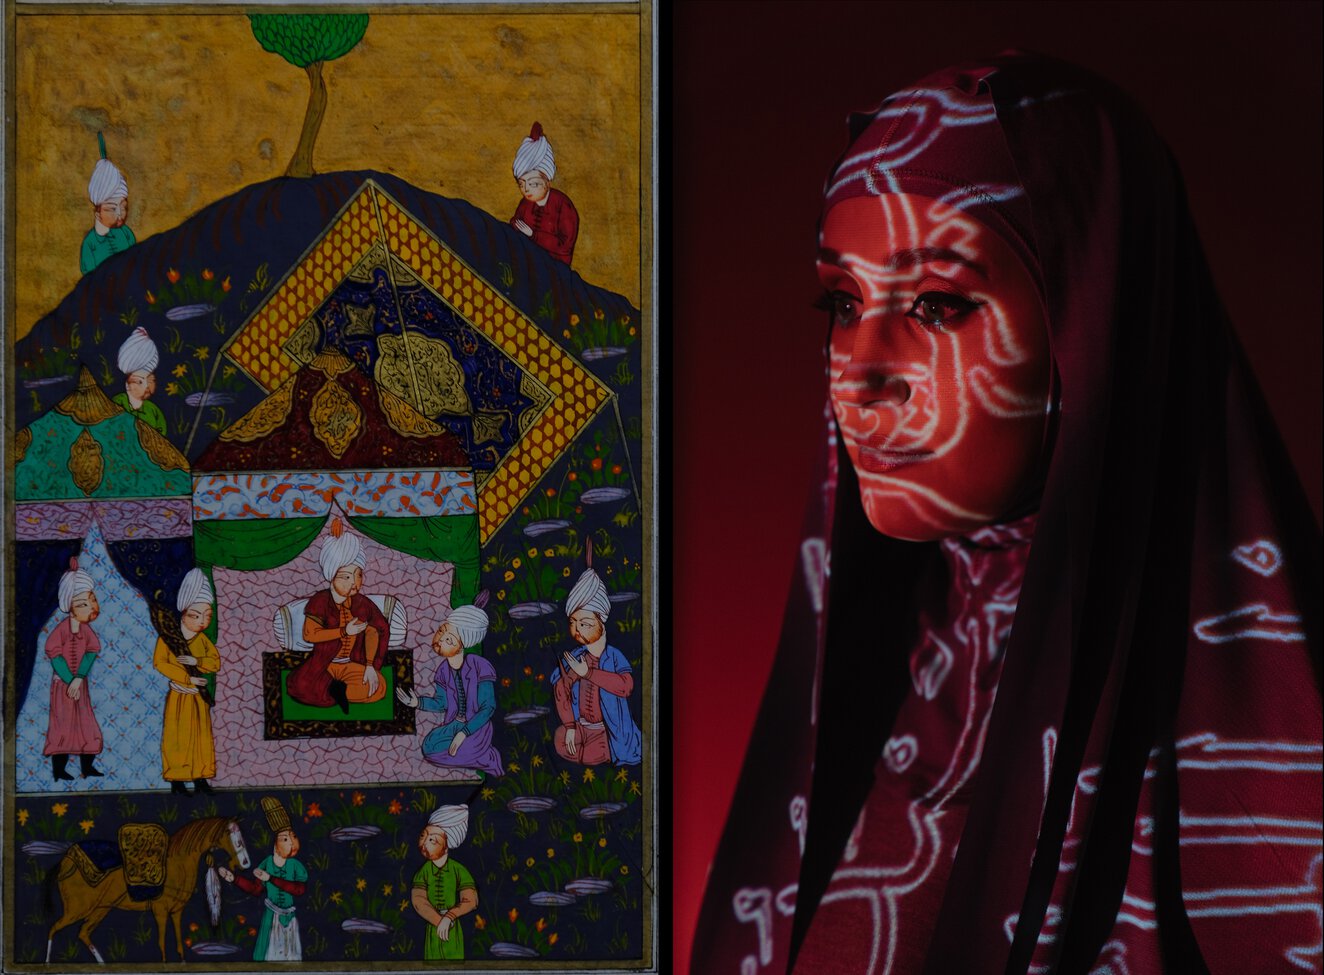 Left: XXX. Right: Woman in Red Hijab and Black Robe.